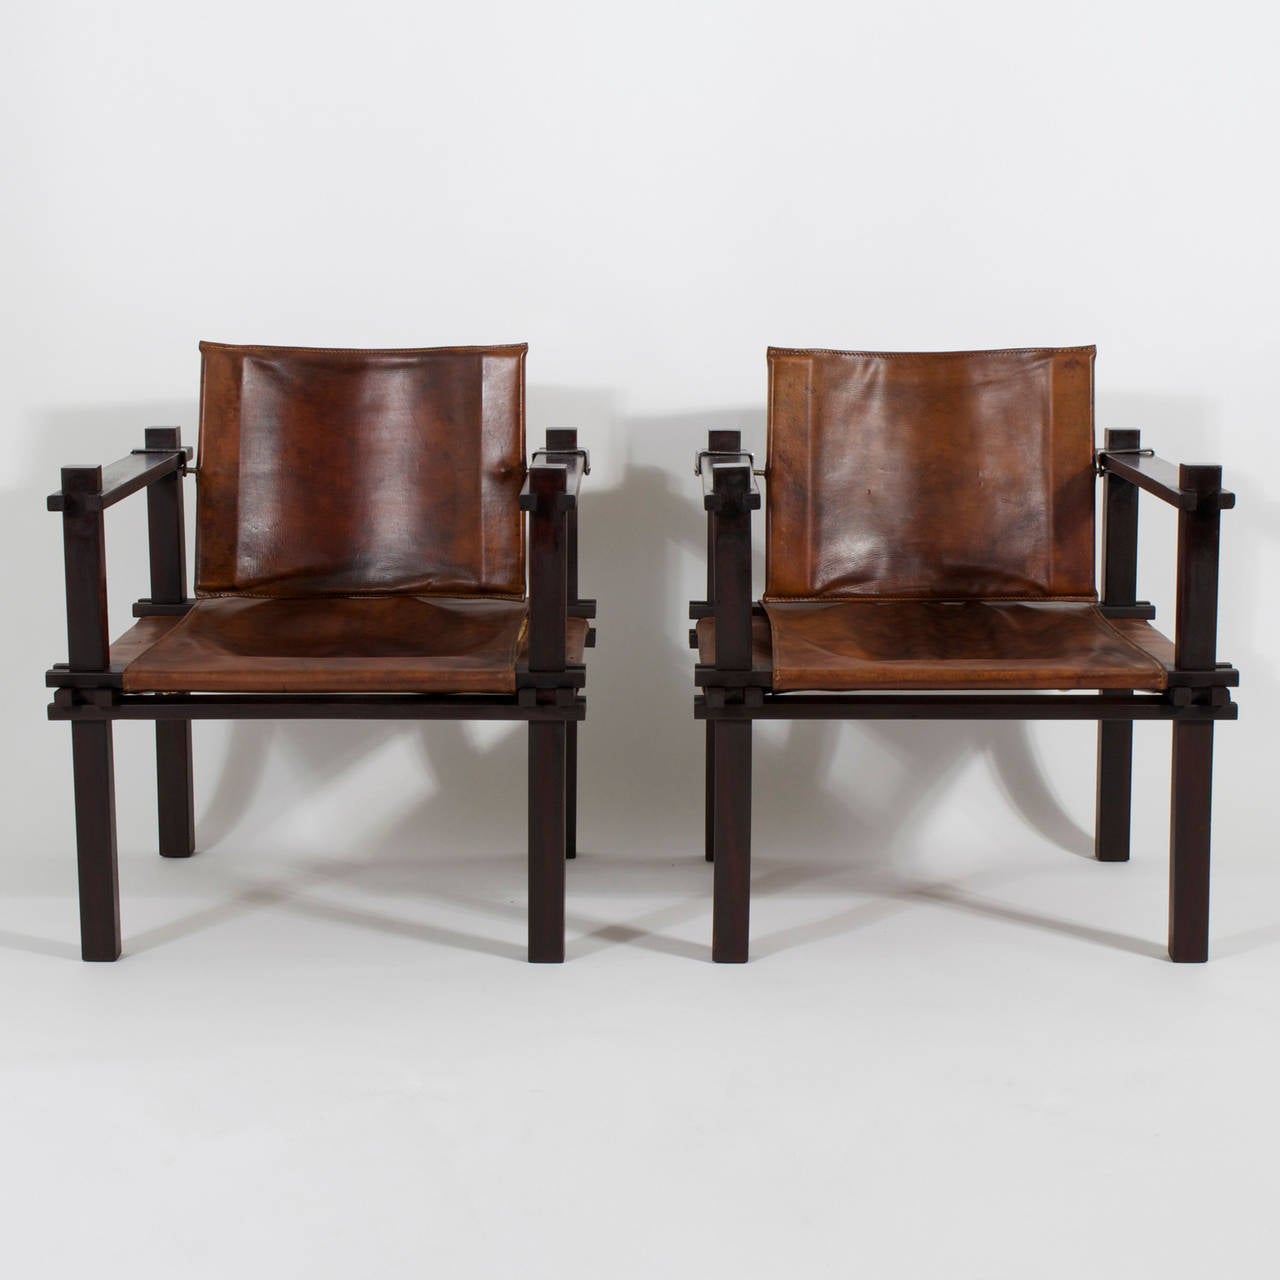 Rare pair of rosewood and perfectly aged leather Mid-Century Modern sling chairs with a rather important air about them. Possessing both an architectural structure and an inviting warmth, these Mid-Century chairs hit on several levels of the